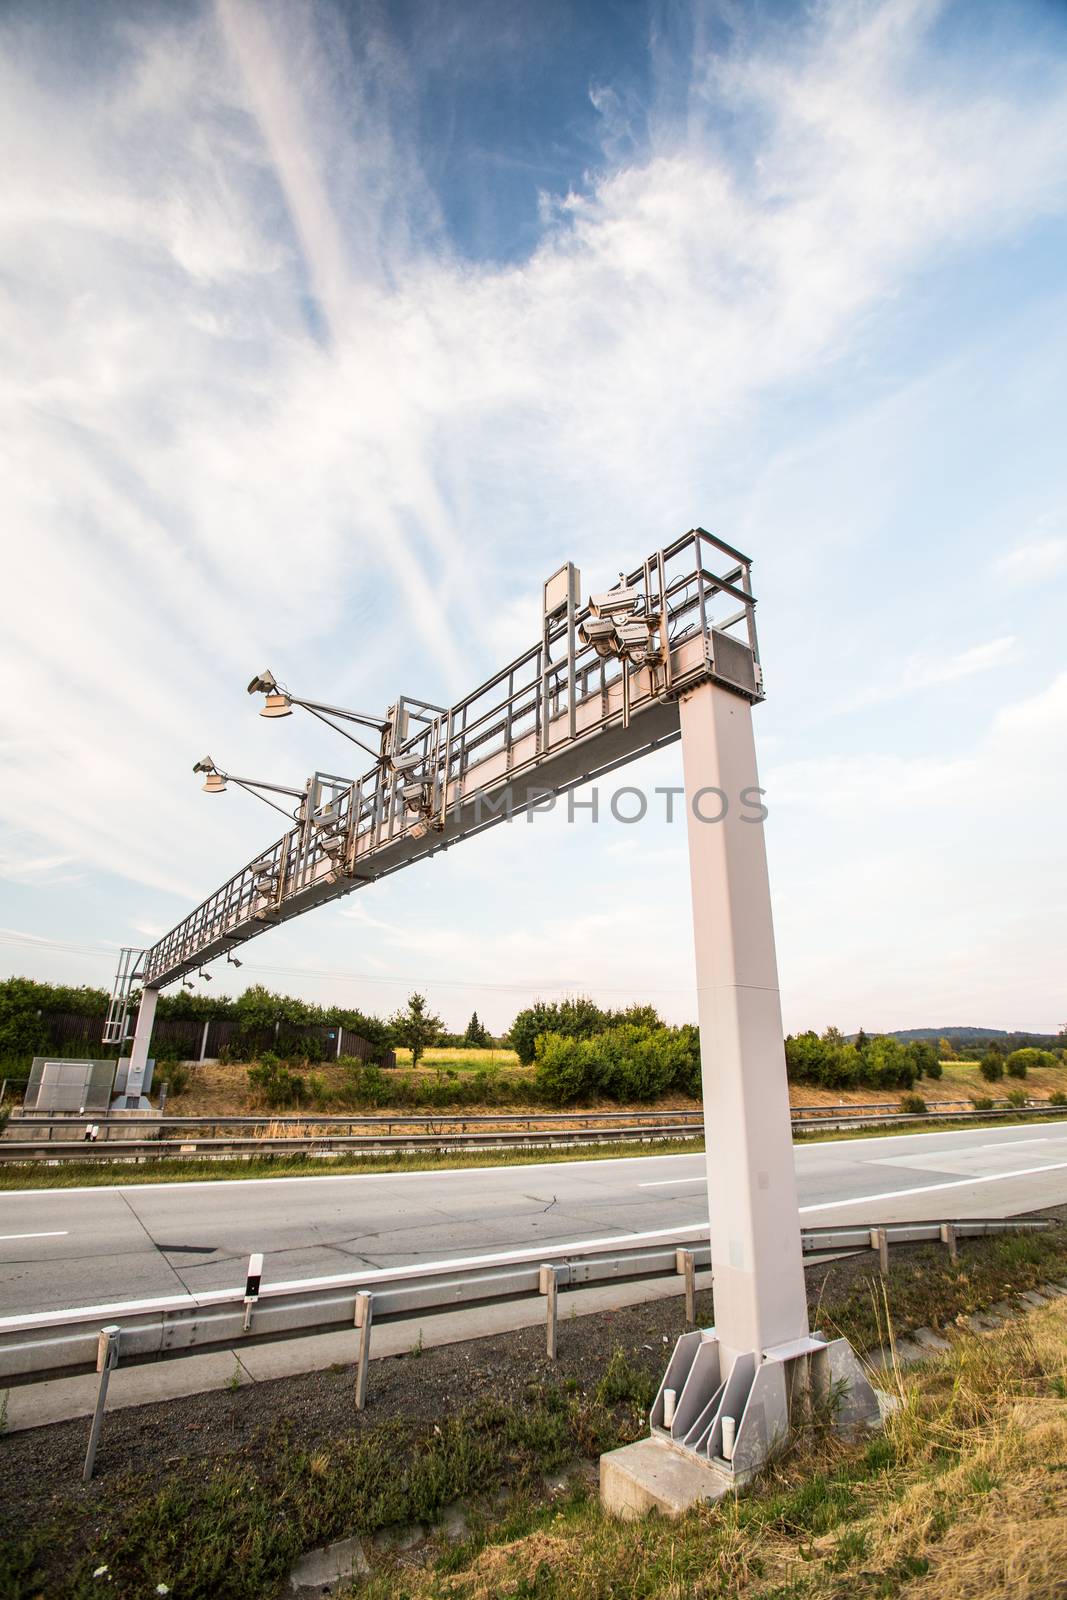 Toll gate on a highway